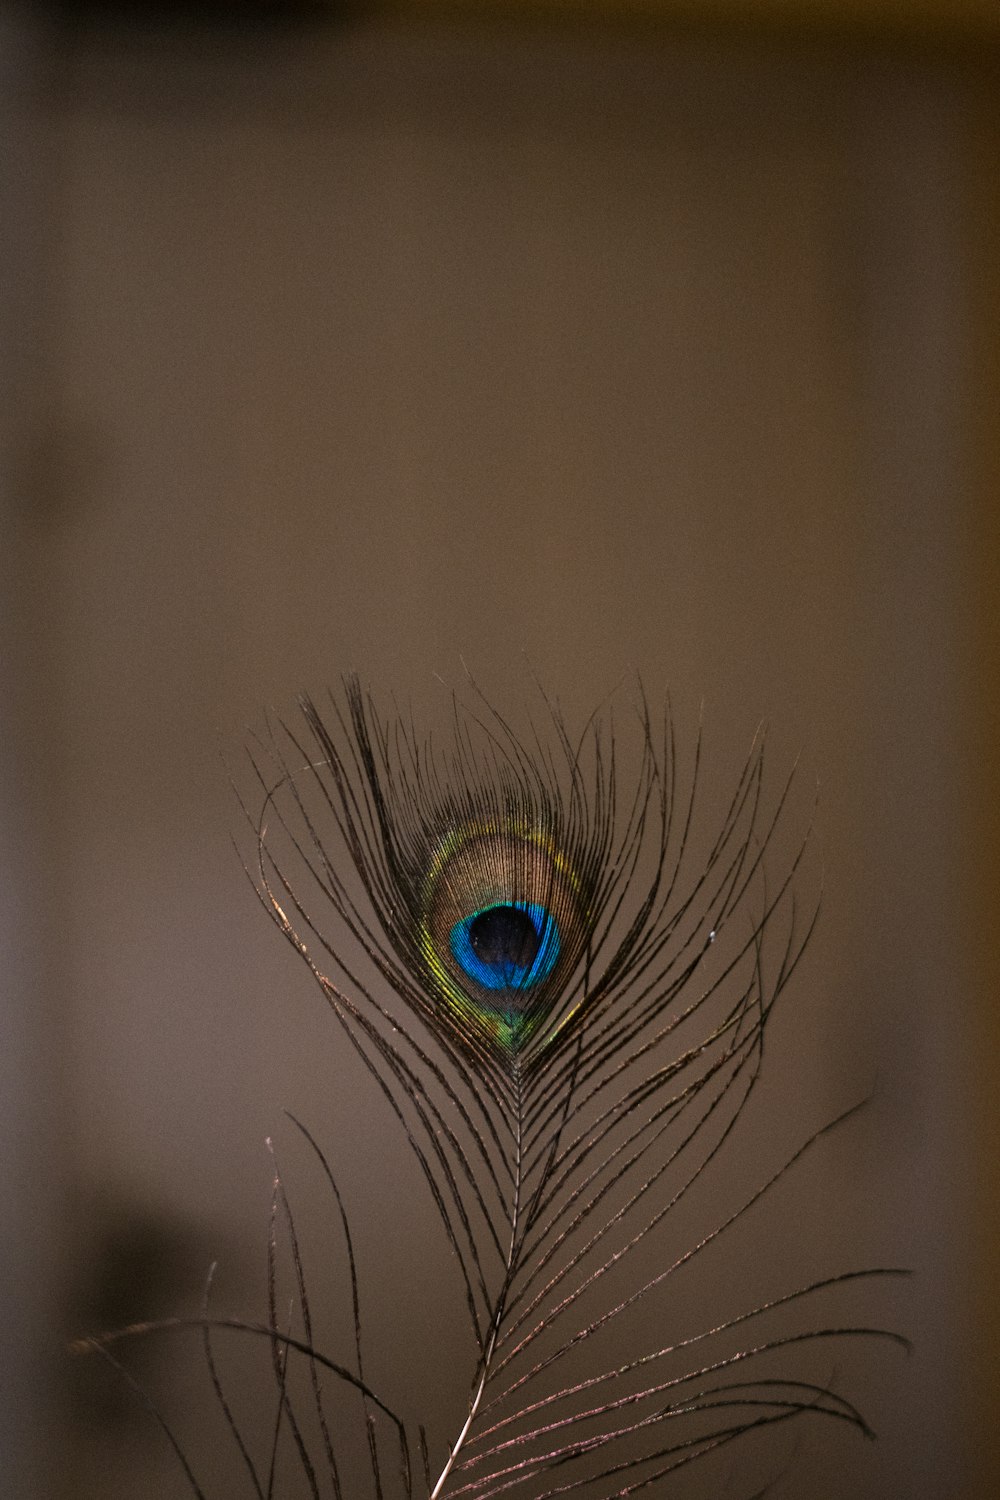 peacock feather in close up photography